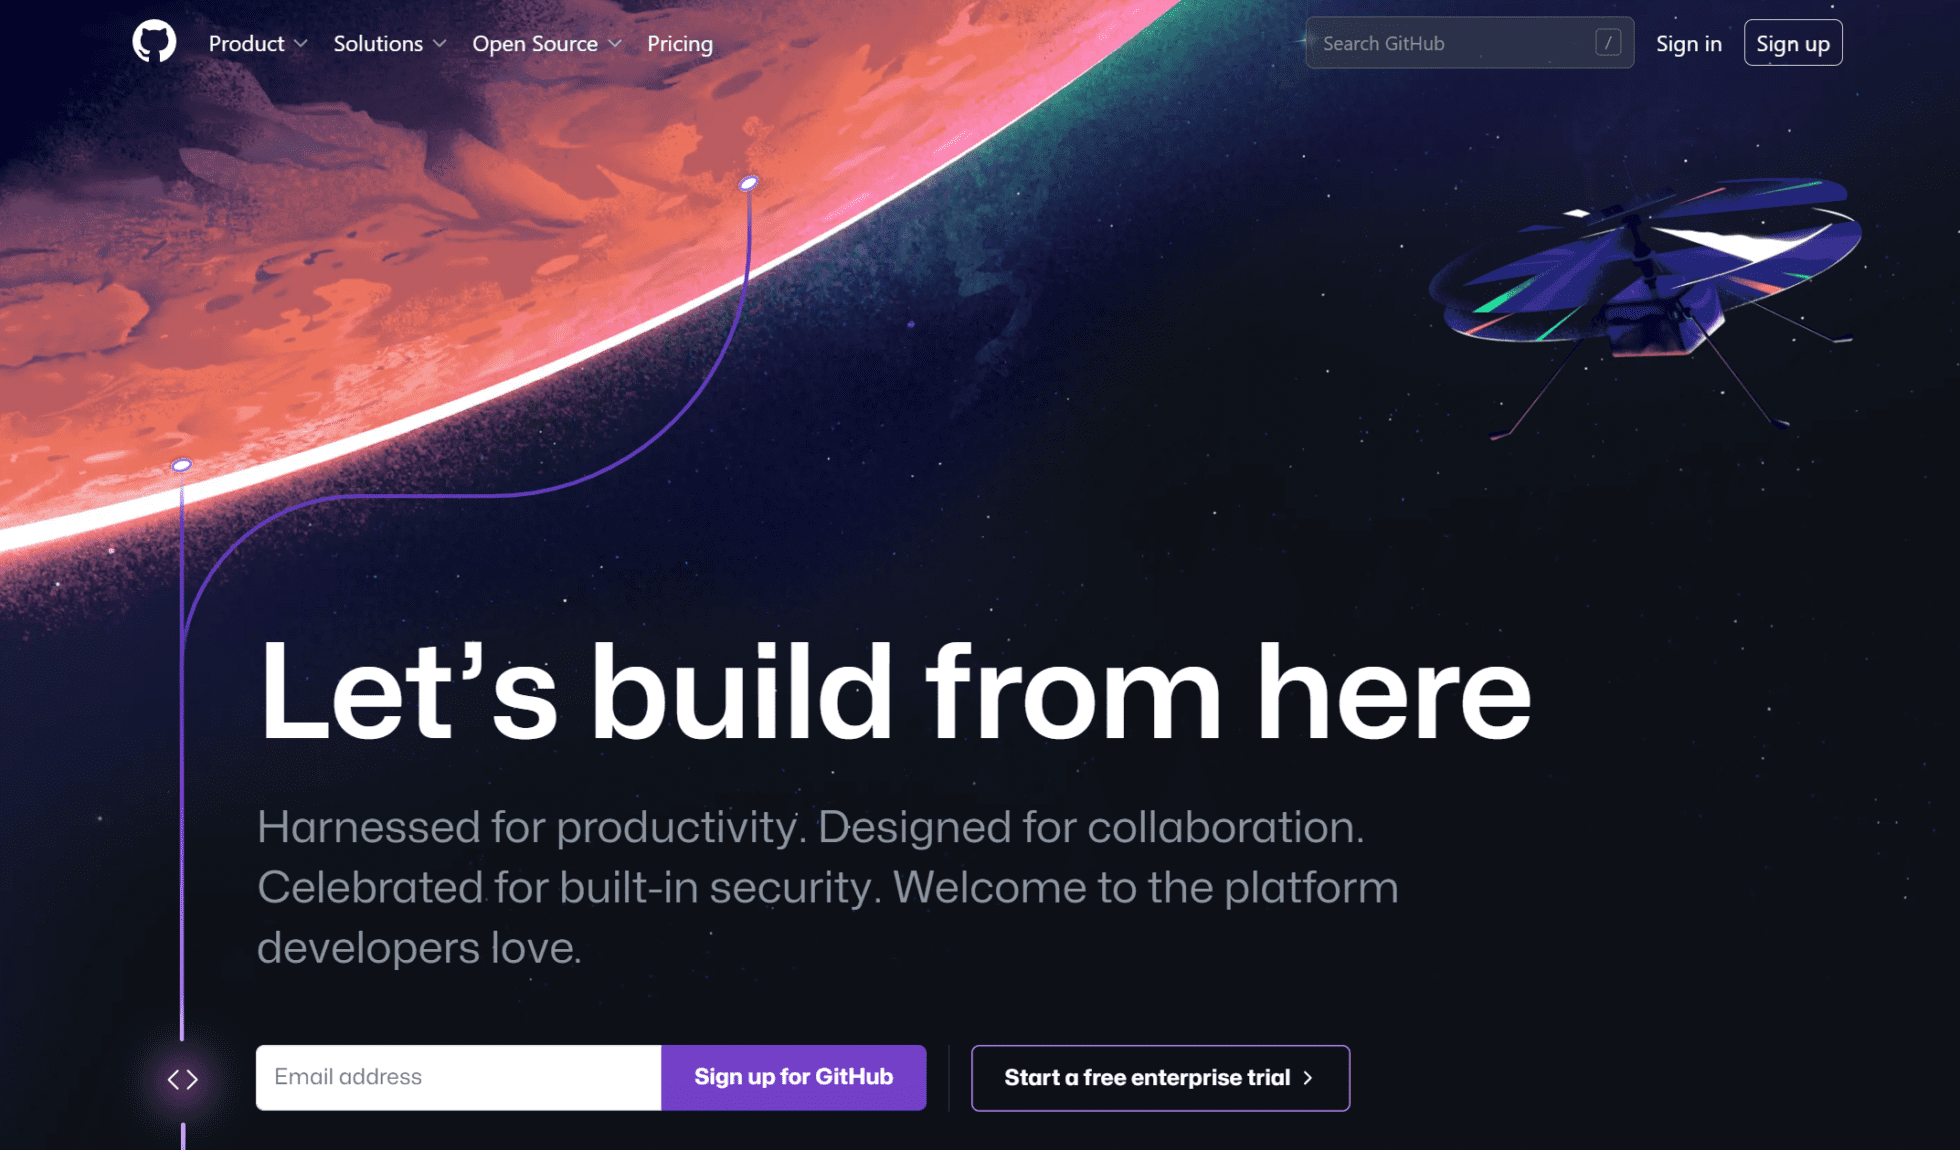 Github homescreen: Let's build from here